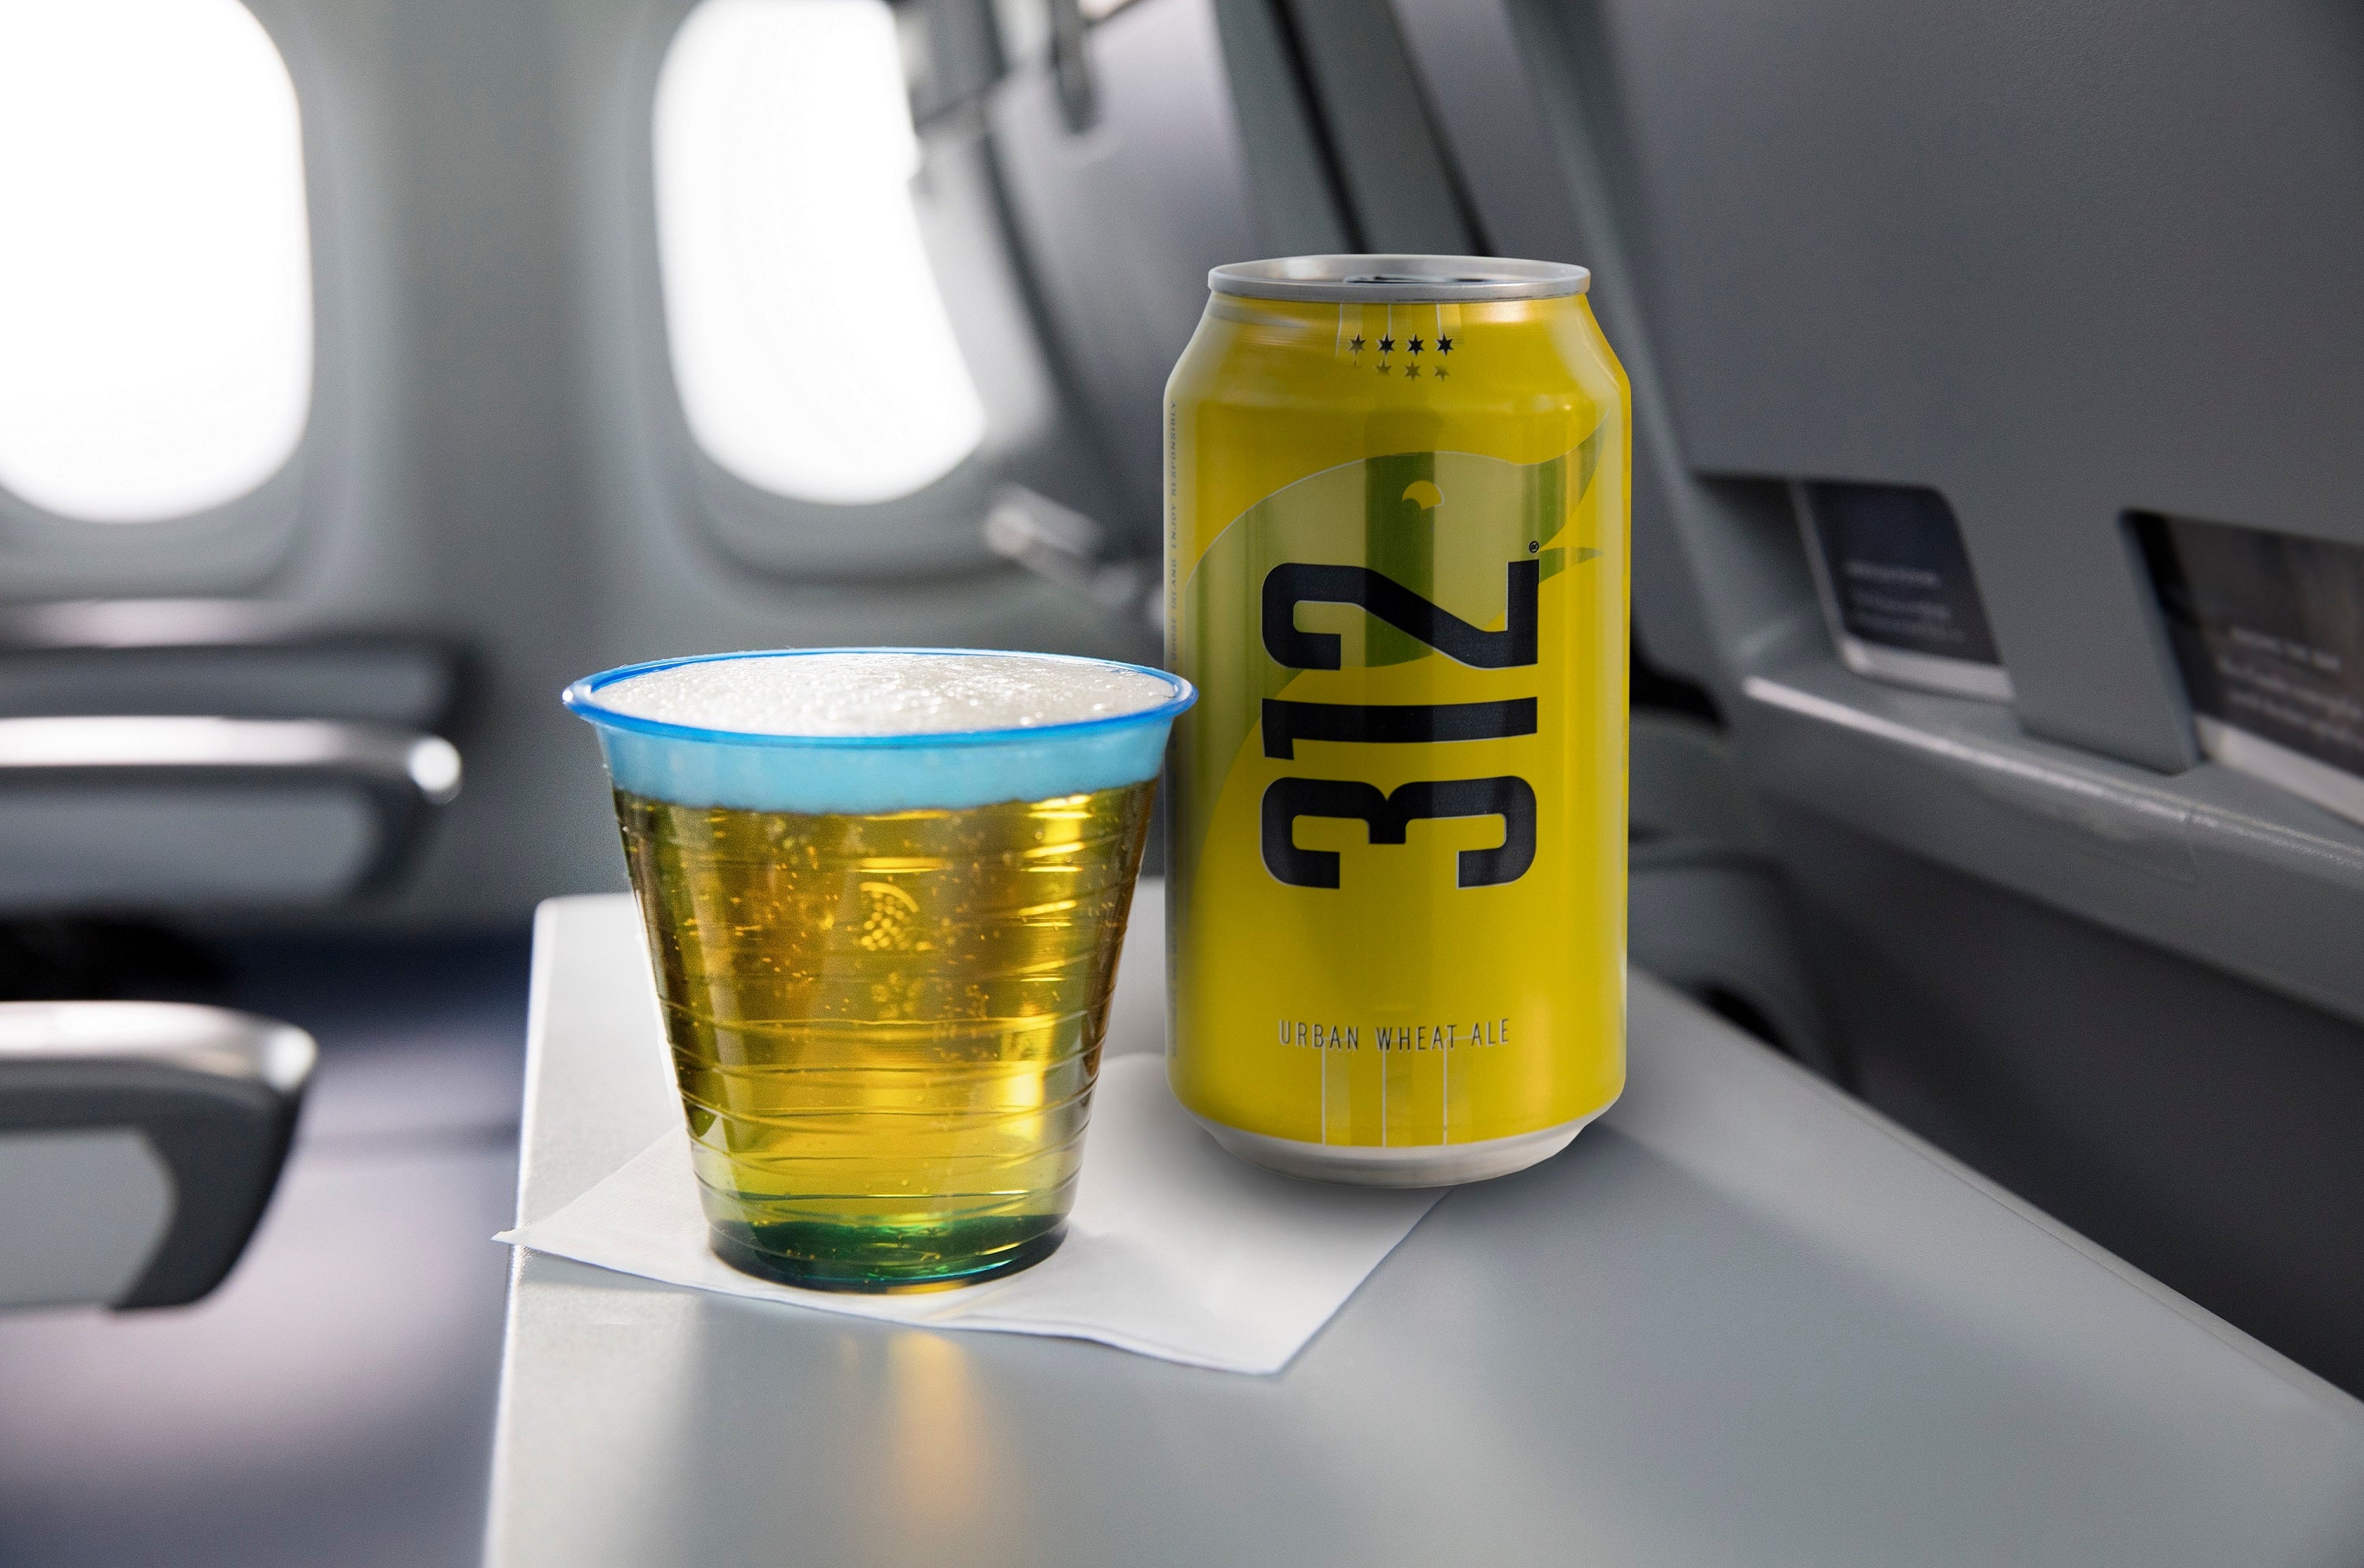 United Will Be Giving Out Free Goose Island Beer On Select Flights